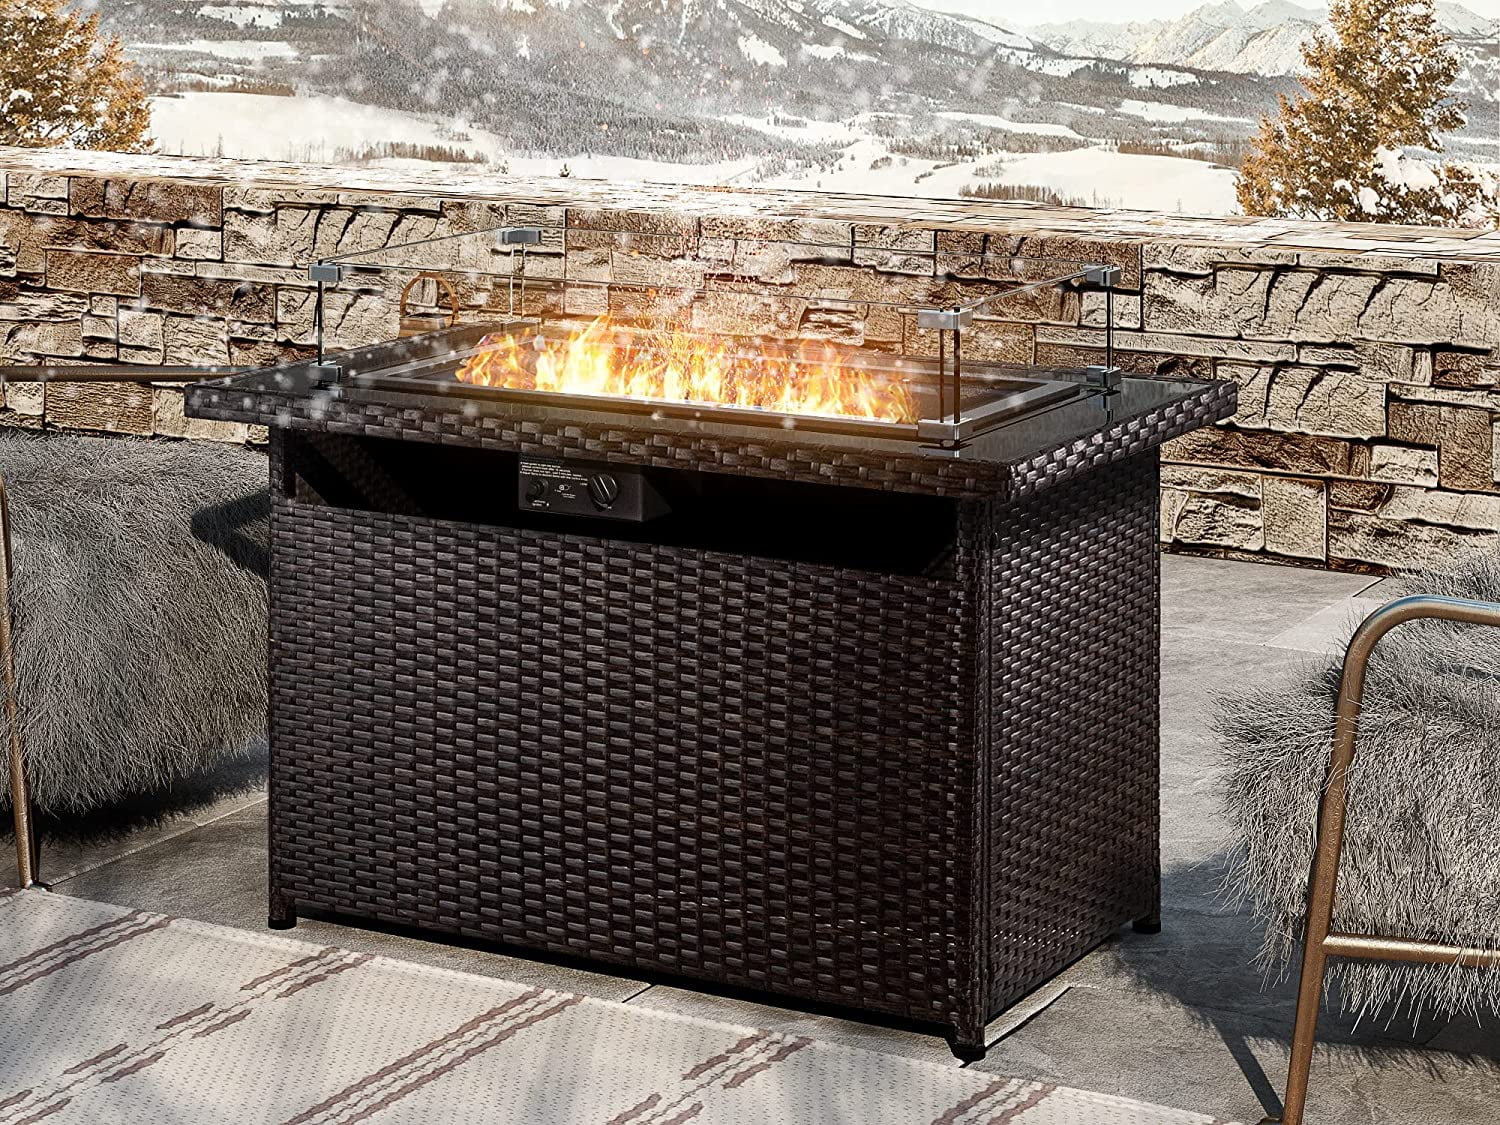 Patio Allewie Fire Table Poolside Deck Backyard Black 43 Inch 55,000 BTU PE Rattan Rectangular Propane Gas Fire Table with Glass Wind Guard and Cover for Garden 